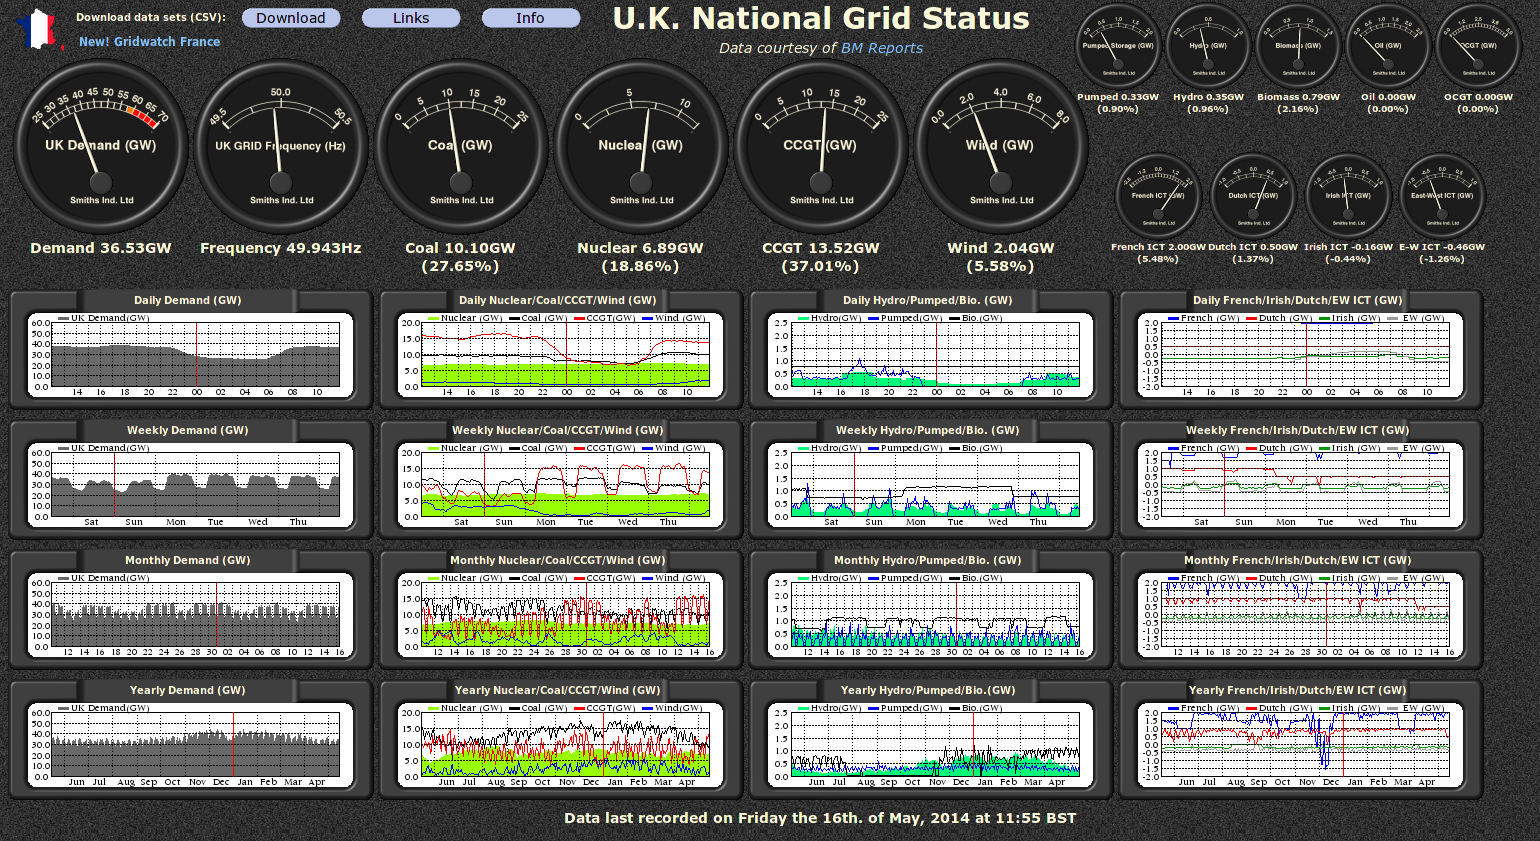 Live view of the UK electricity grid